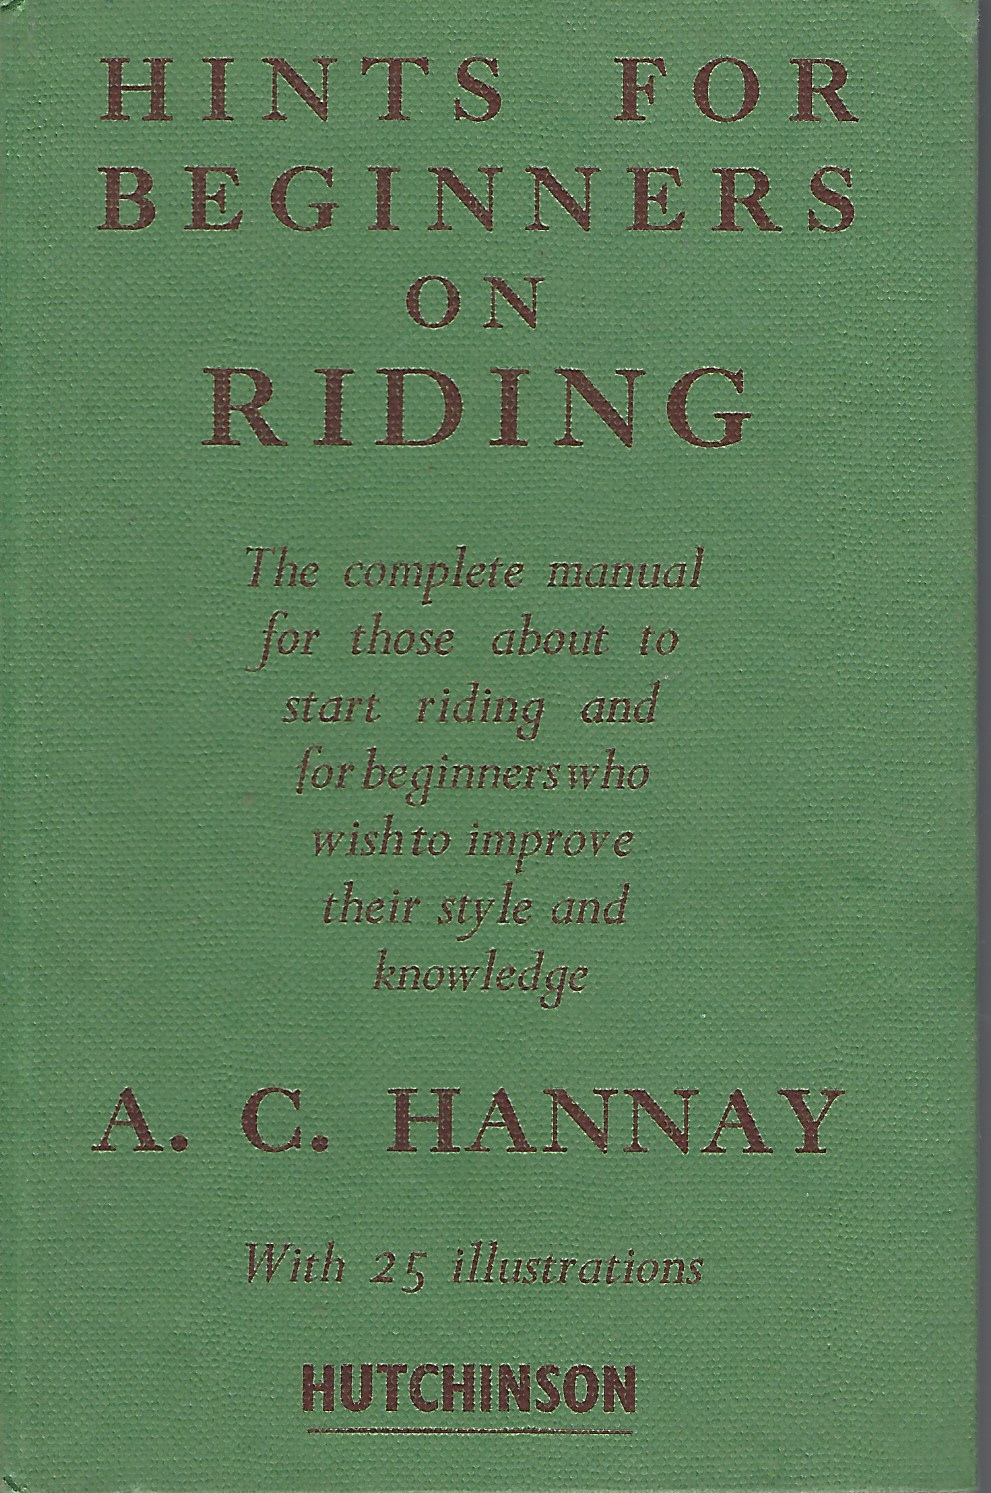 HANNAY A. C. - Hints for Beginners on Riding